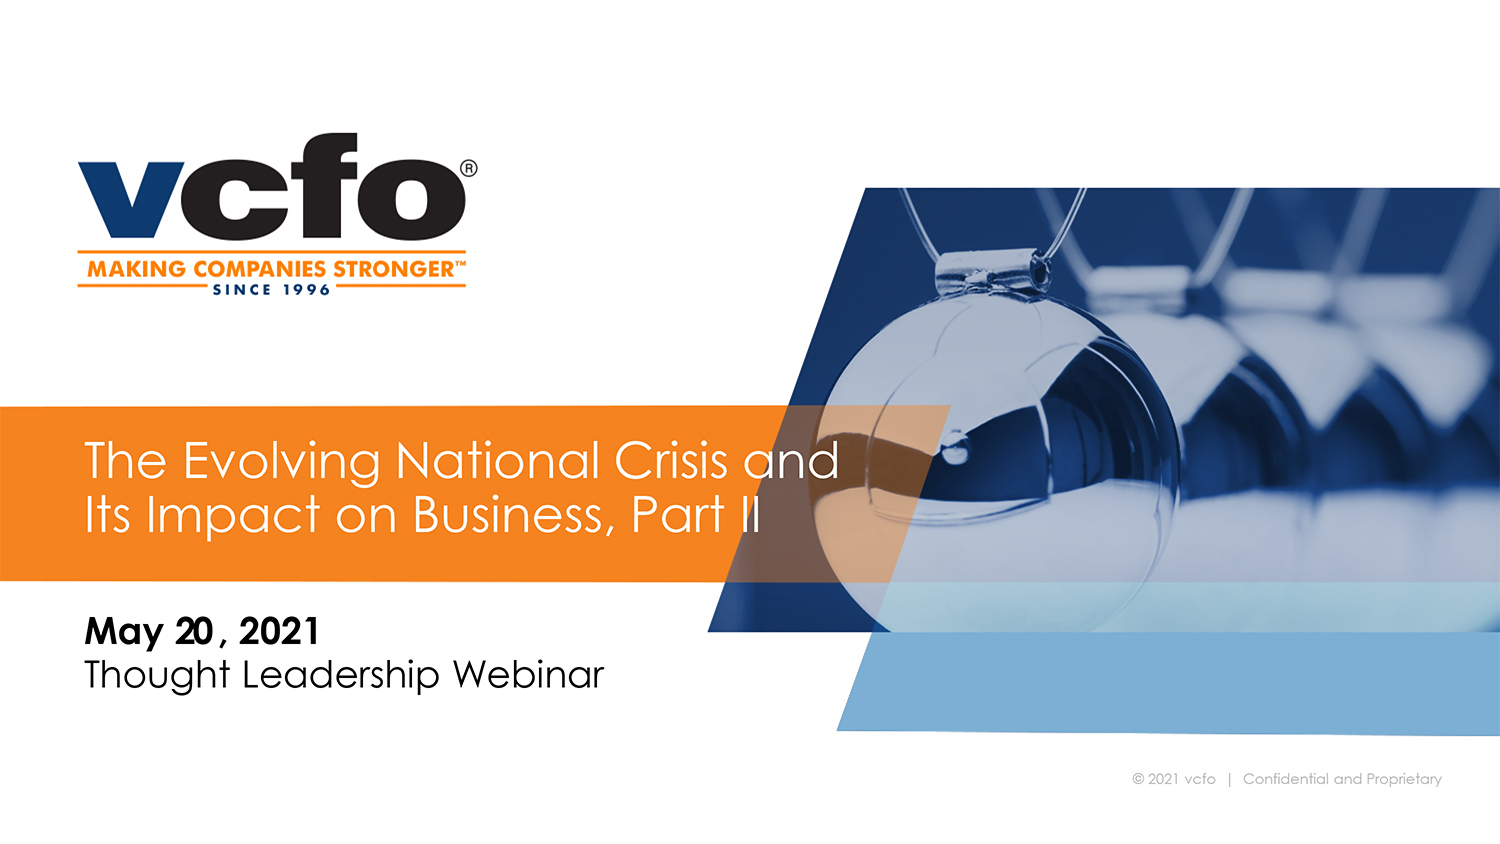 Evolving National Crisis and its Business Impact